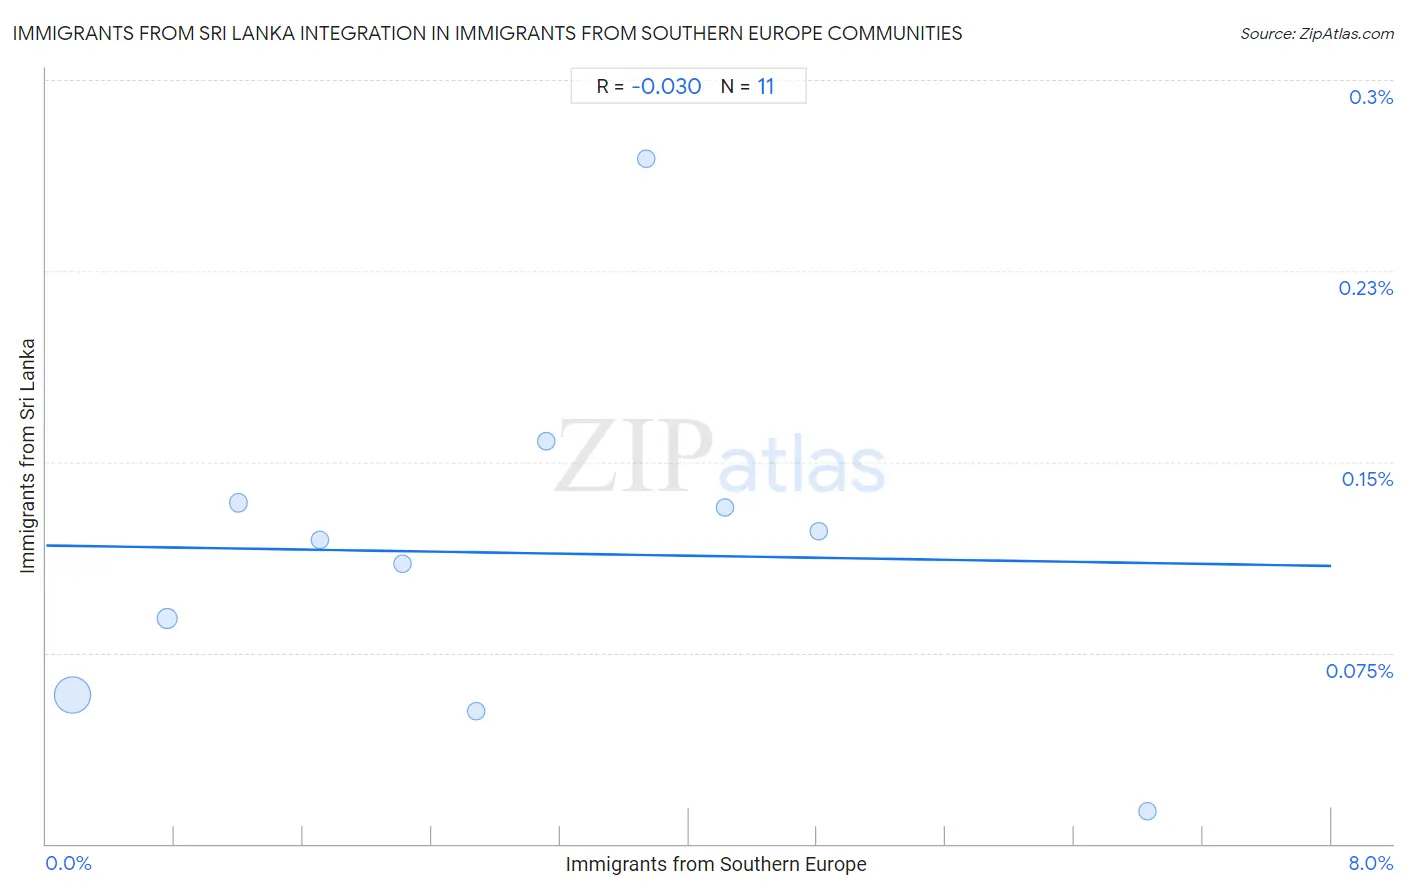 Immigrants from Southern Europe Integration in Immigrants from Sri Lanka Communities